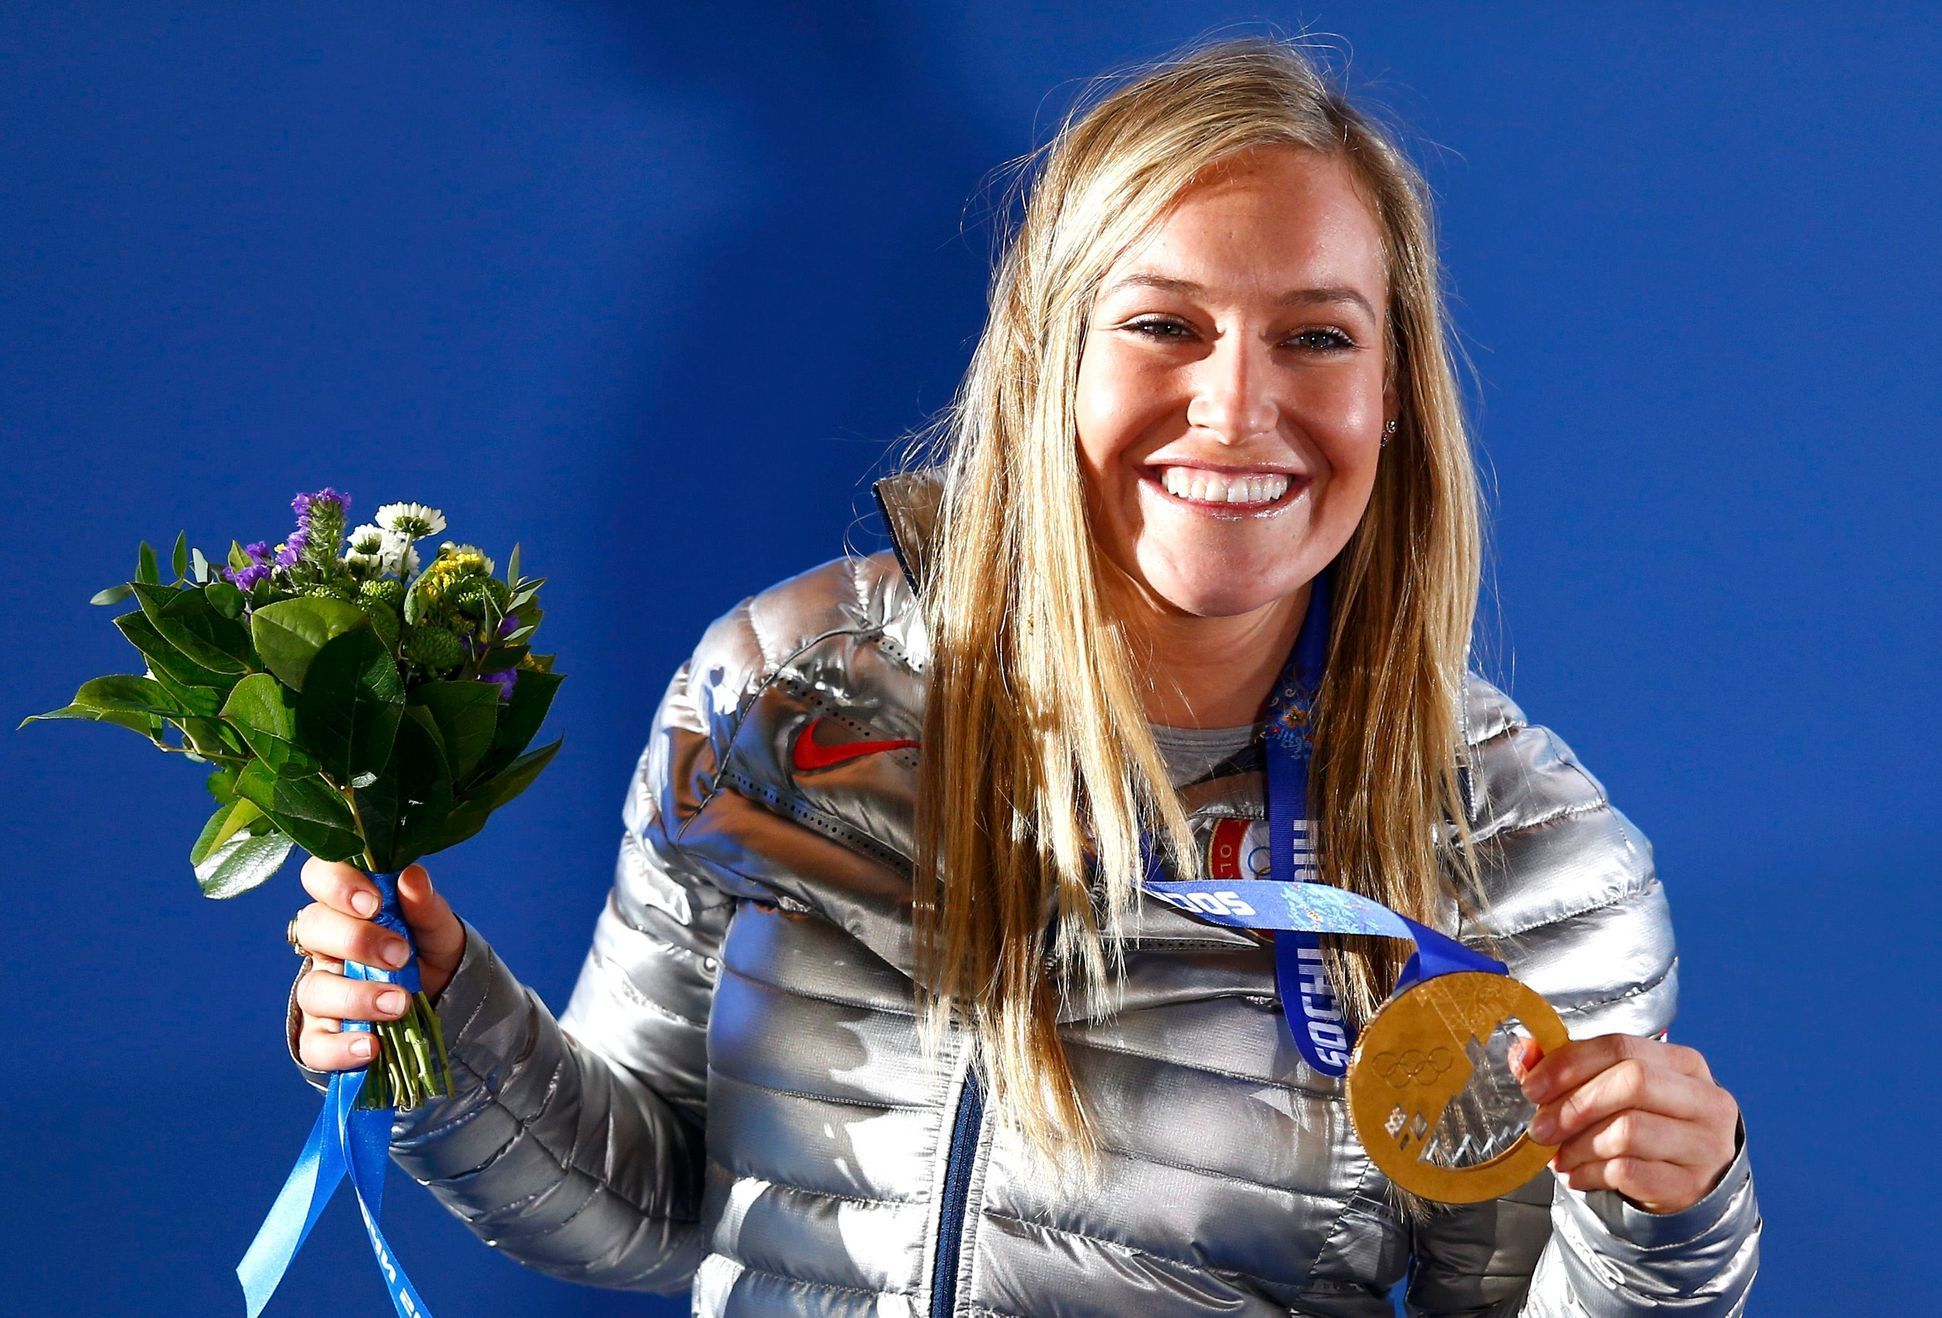 Gold medalist Jamie Anderson of the U.S. poses on the podium at the medal ceremony after the women's snowboard slopestyle event at the